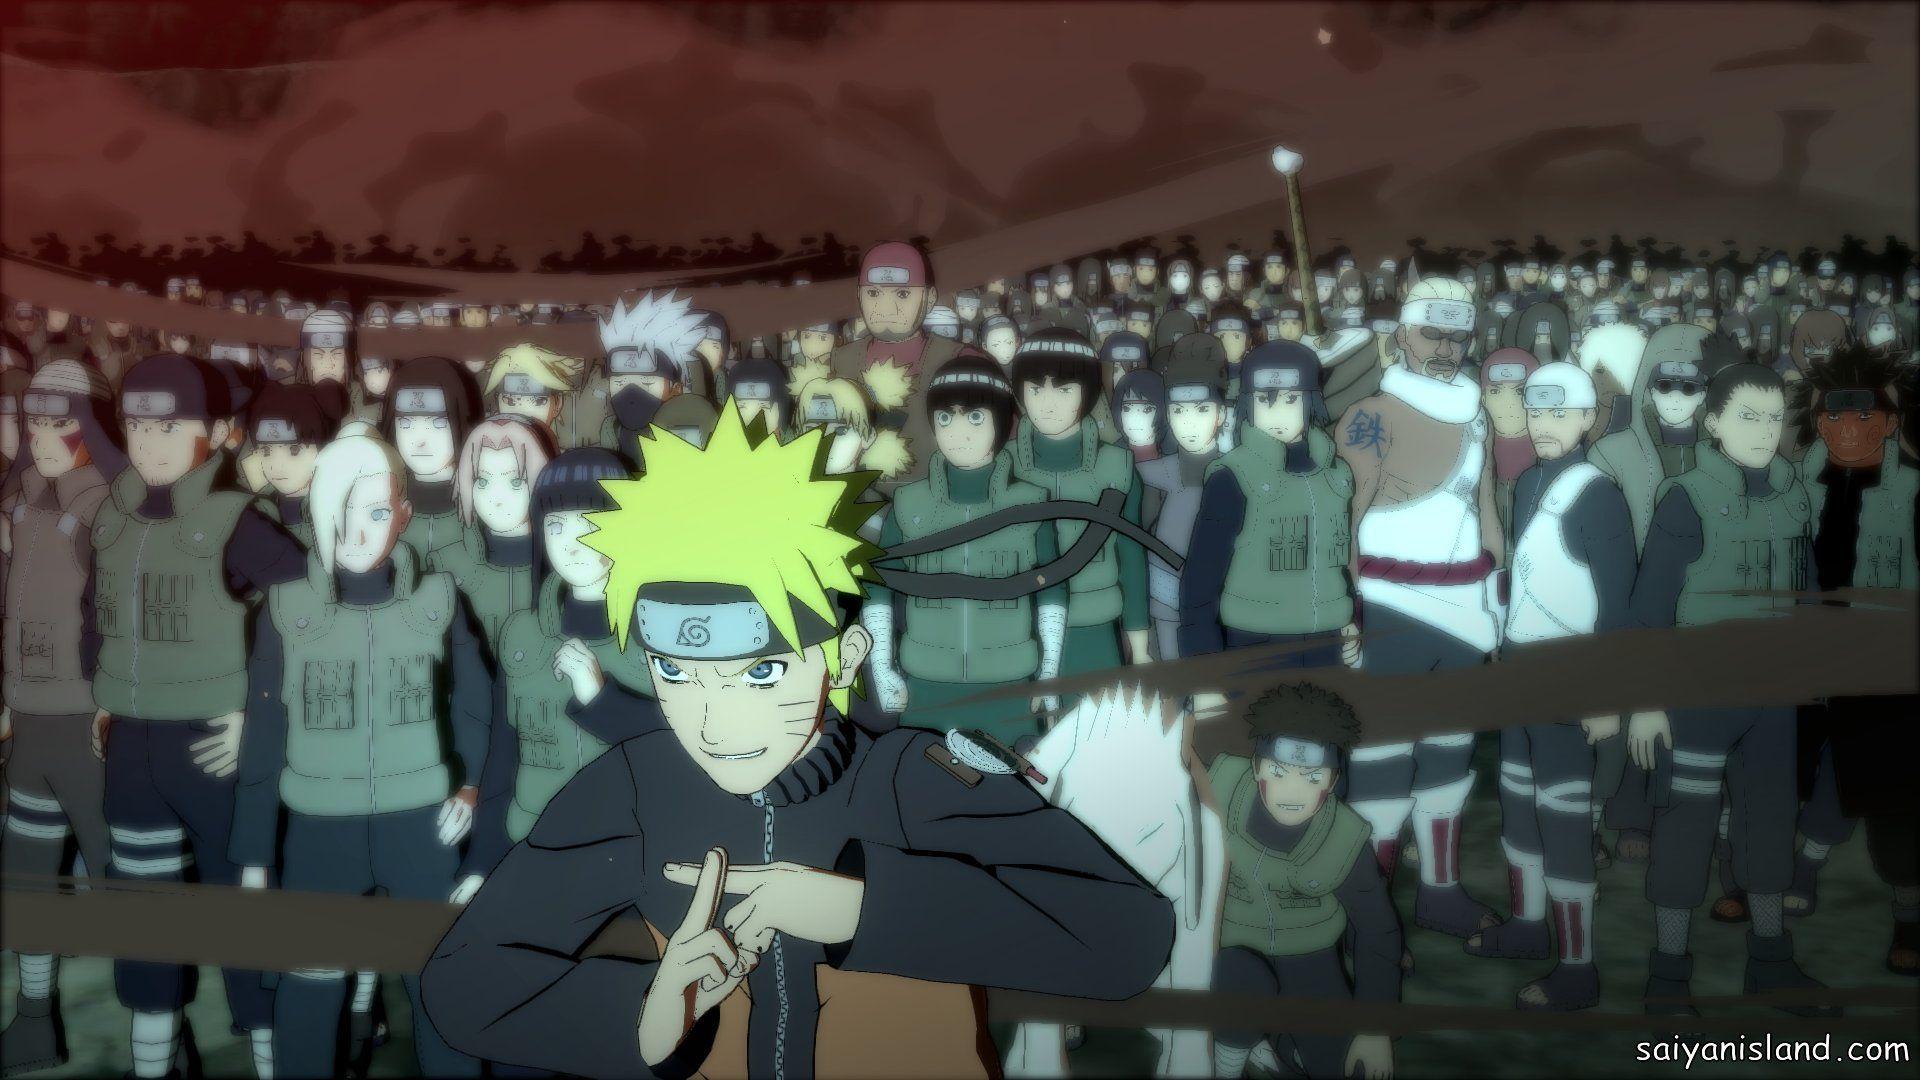 Naruto Storm 4: Single Round Fights Confirmed, Story Mode Arcs